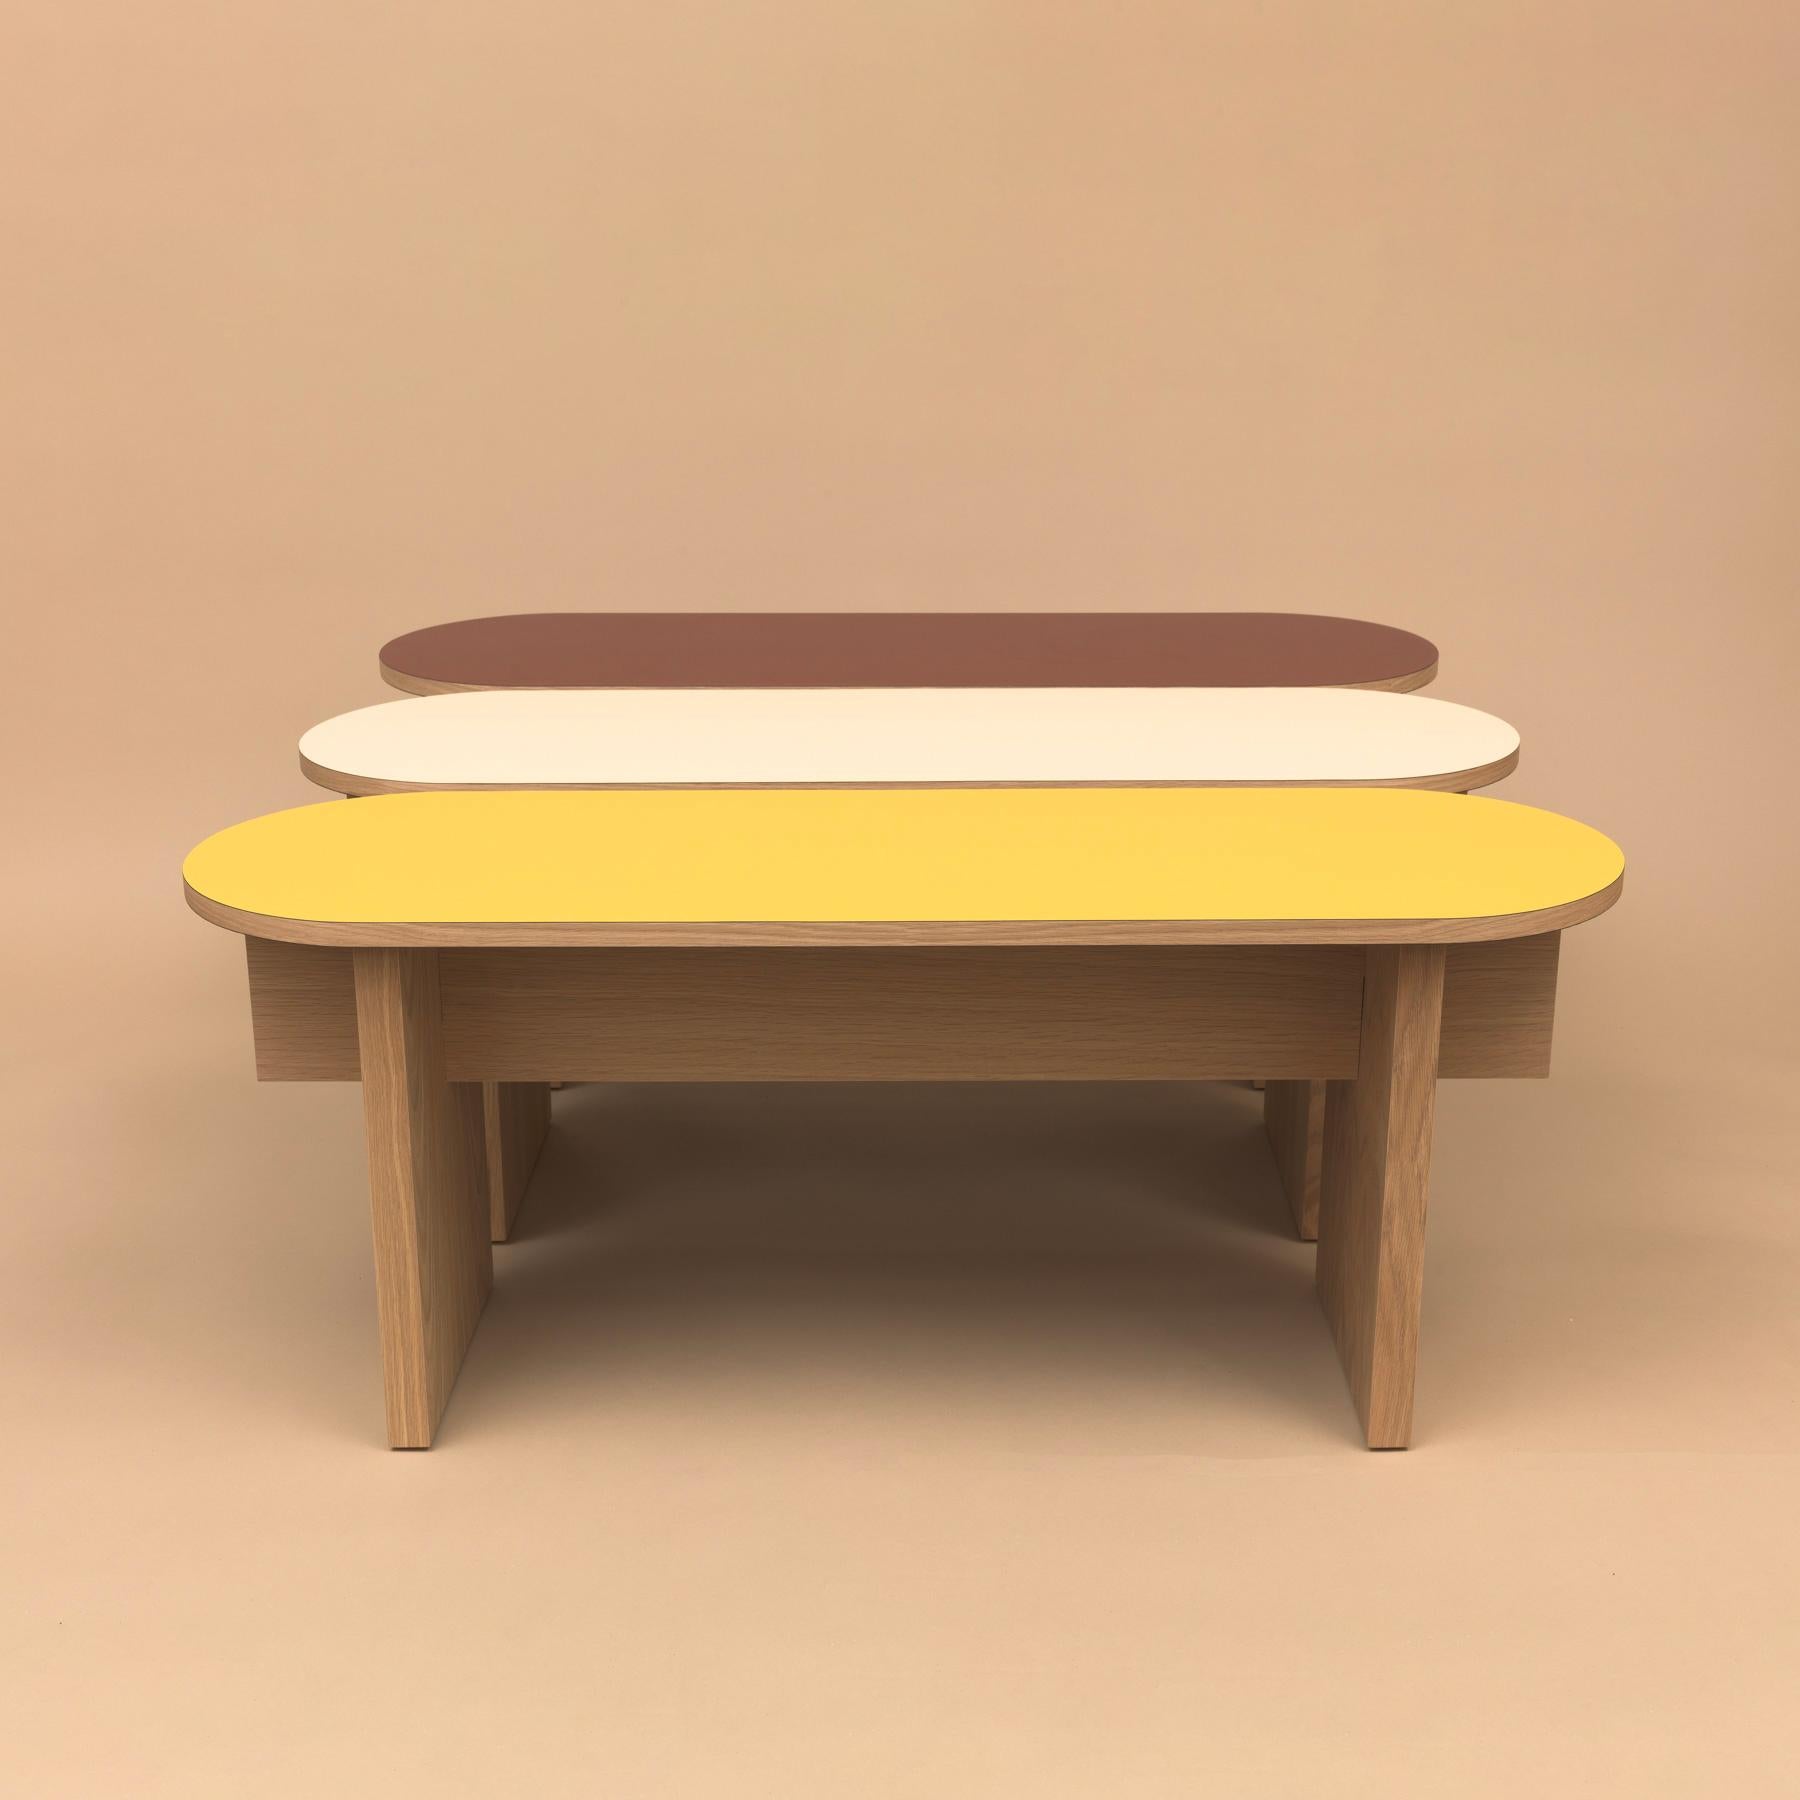 Modern T-Top Bench or Coffee Table in Oak Veneered Plywood and Colorful Laminate